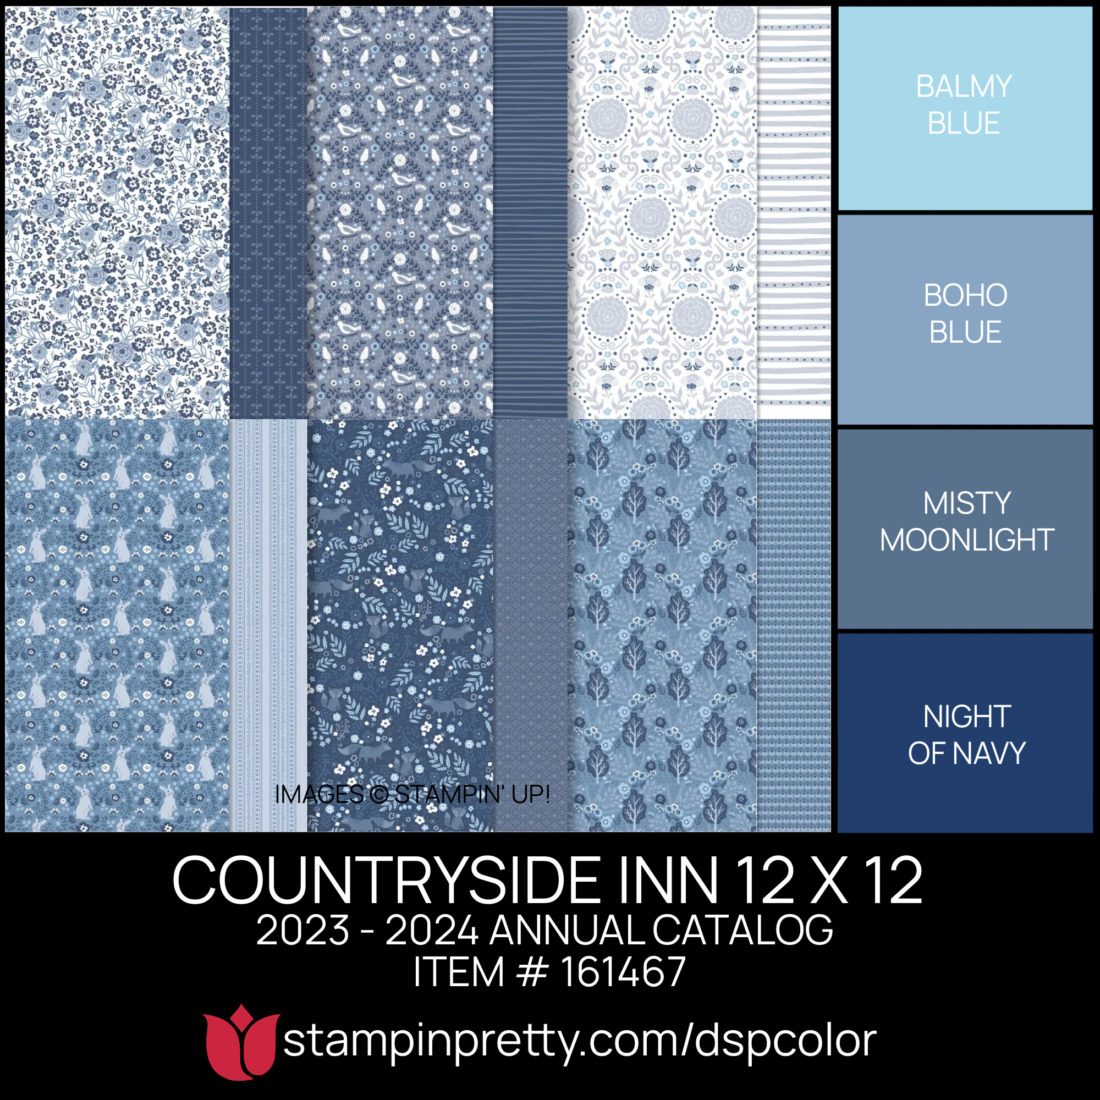 COUNTRYSIDE INN 12 X 12 DSP Coordinating Colors 161467 Stampin' Pretty Mary Fish Shop Online 24-7 - Updated